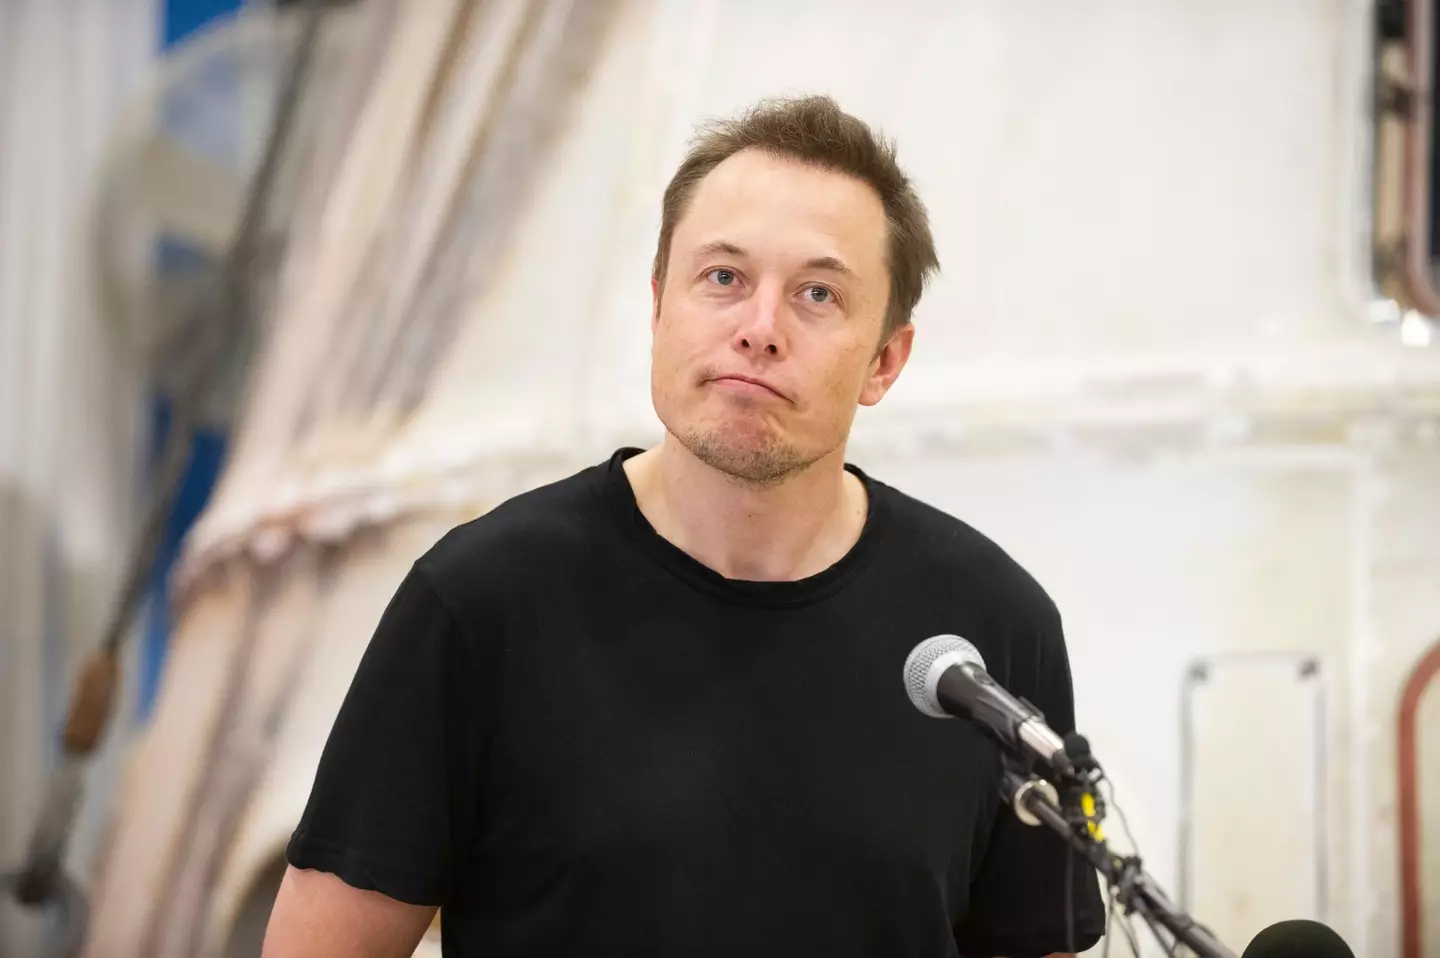 Elon Musk has confirmed a leaked text conversation between him and Bill Gates is real.